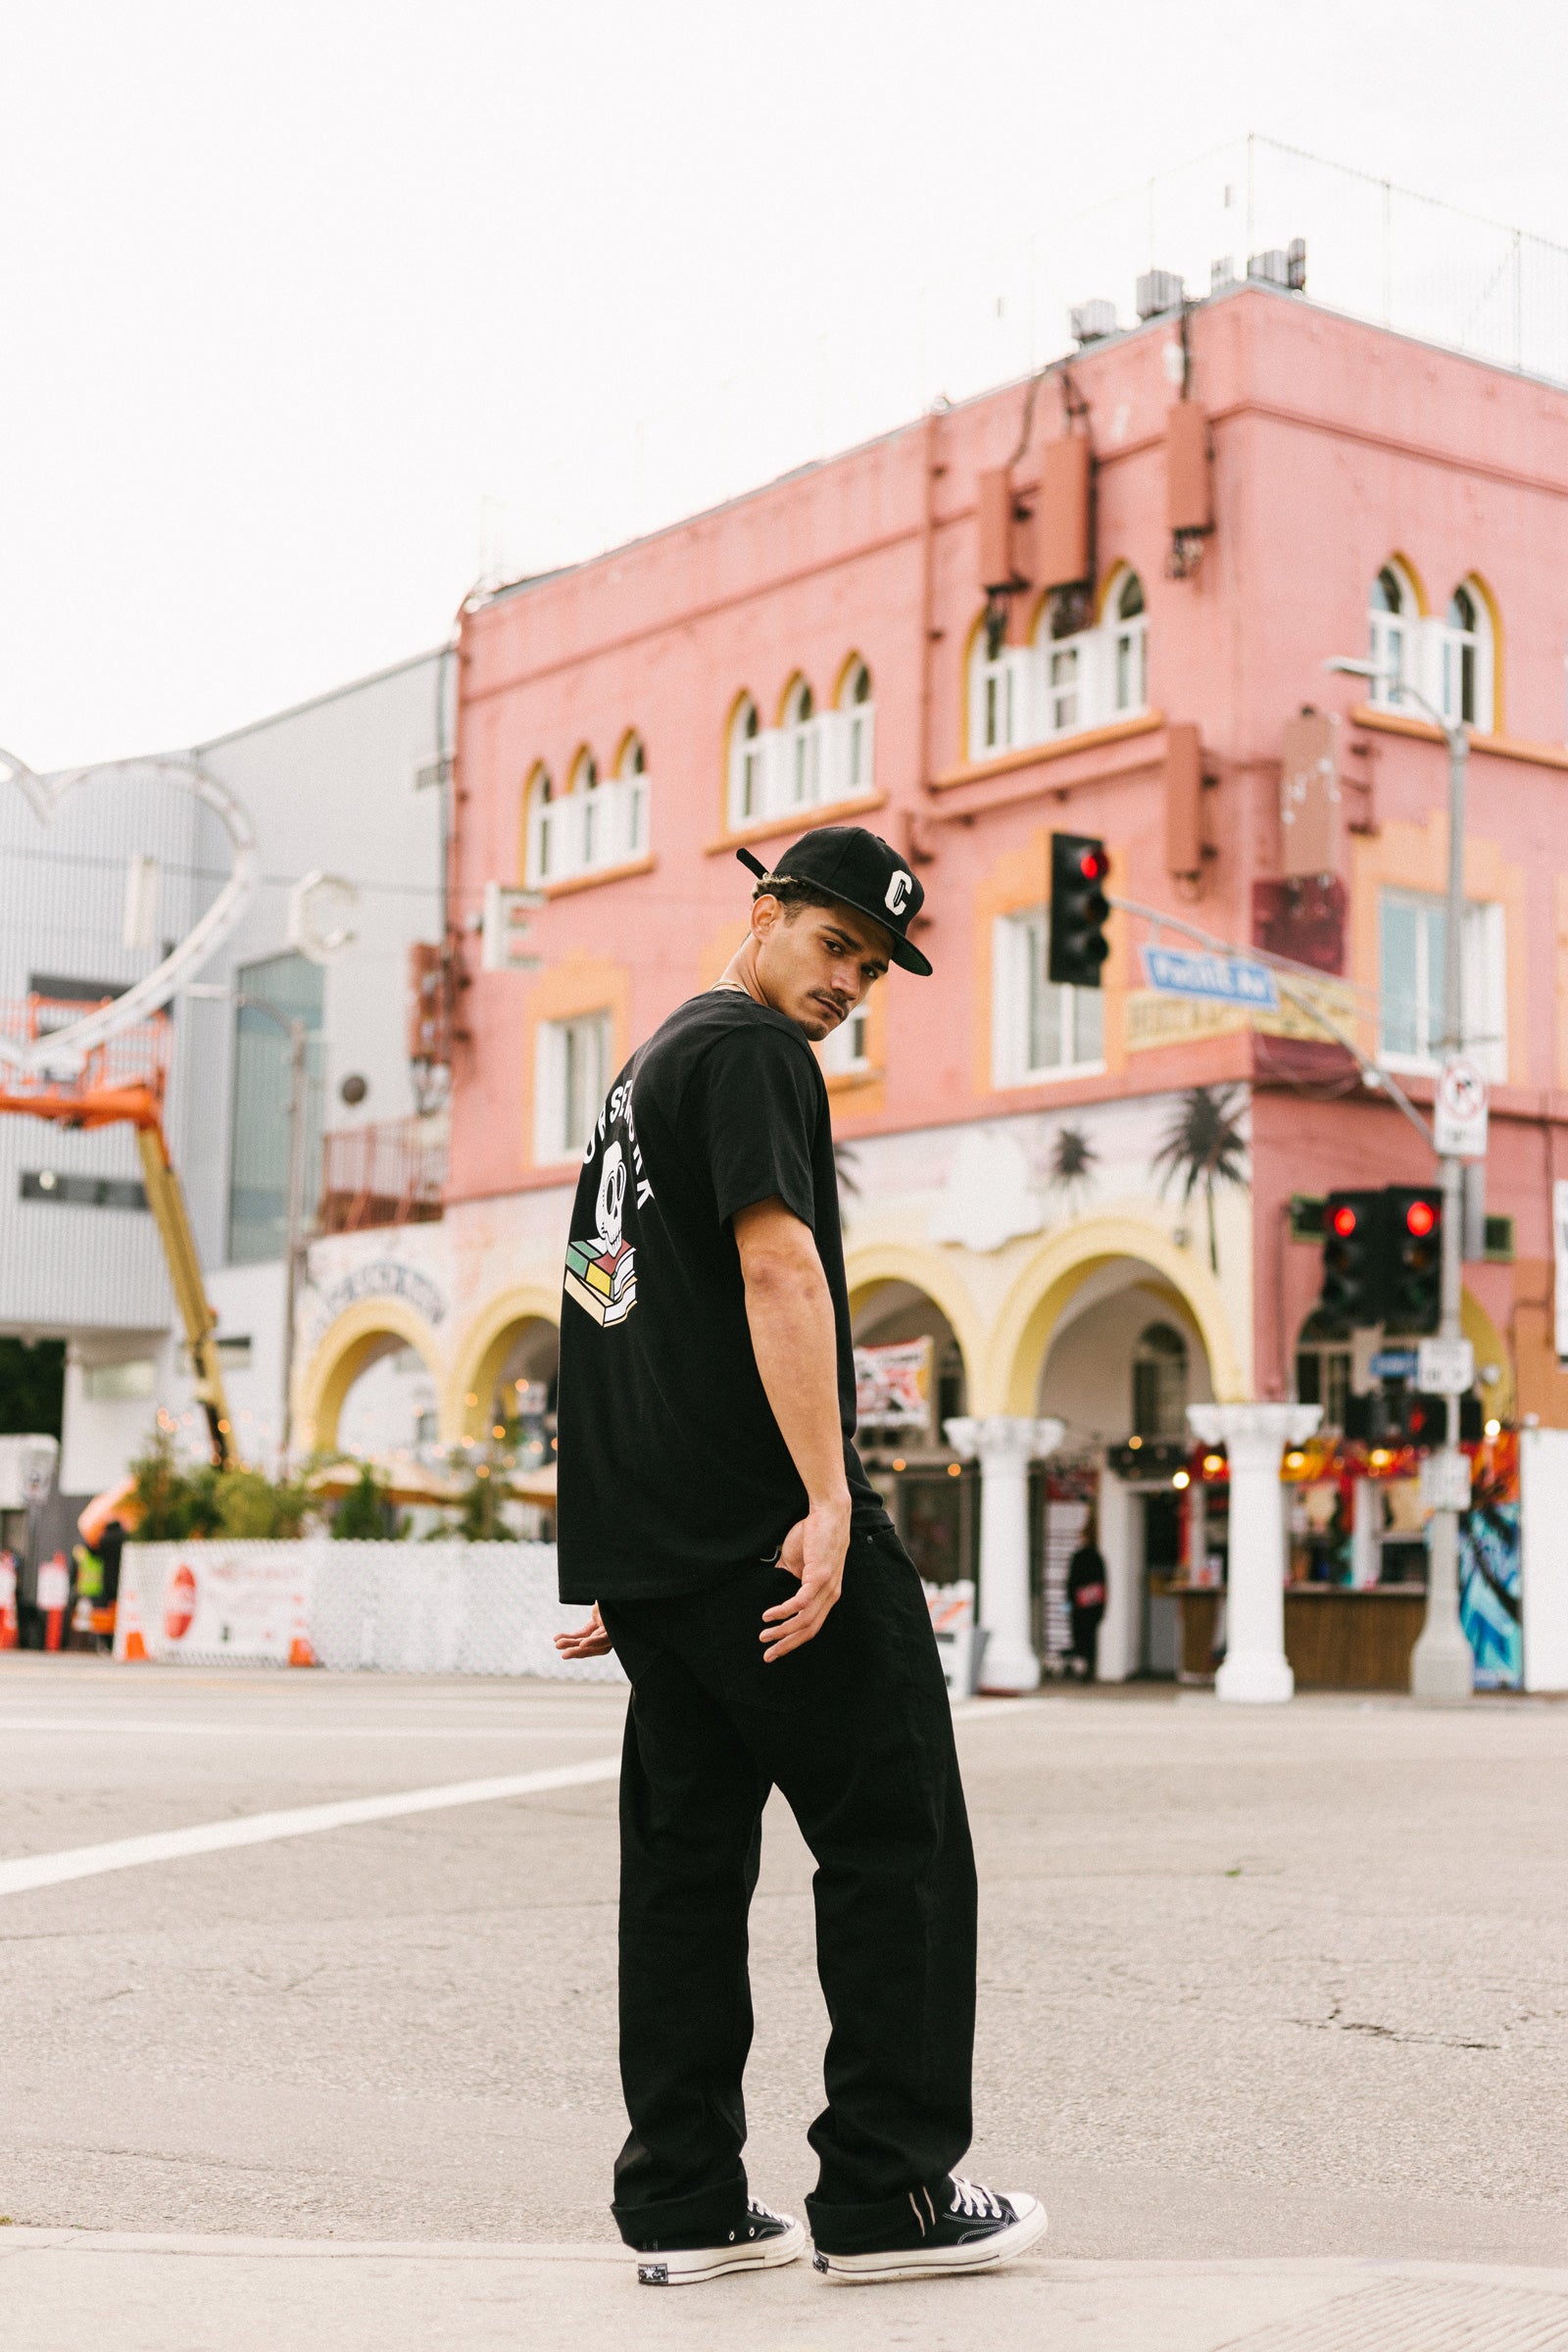 Model wearing the Ebbets Wool C Cap in black and the Required Reading Tee in black while standing on the sidewalk of an intersection.